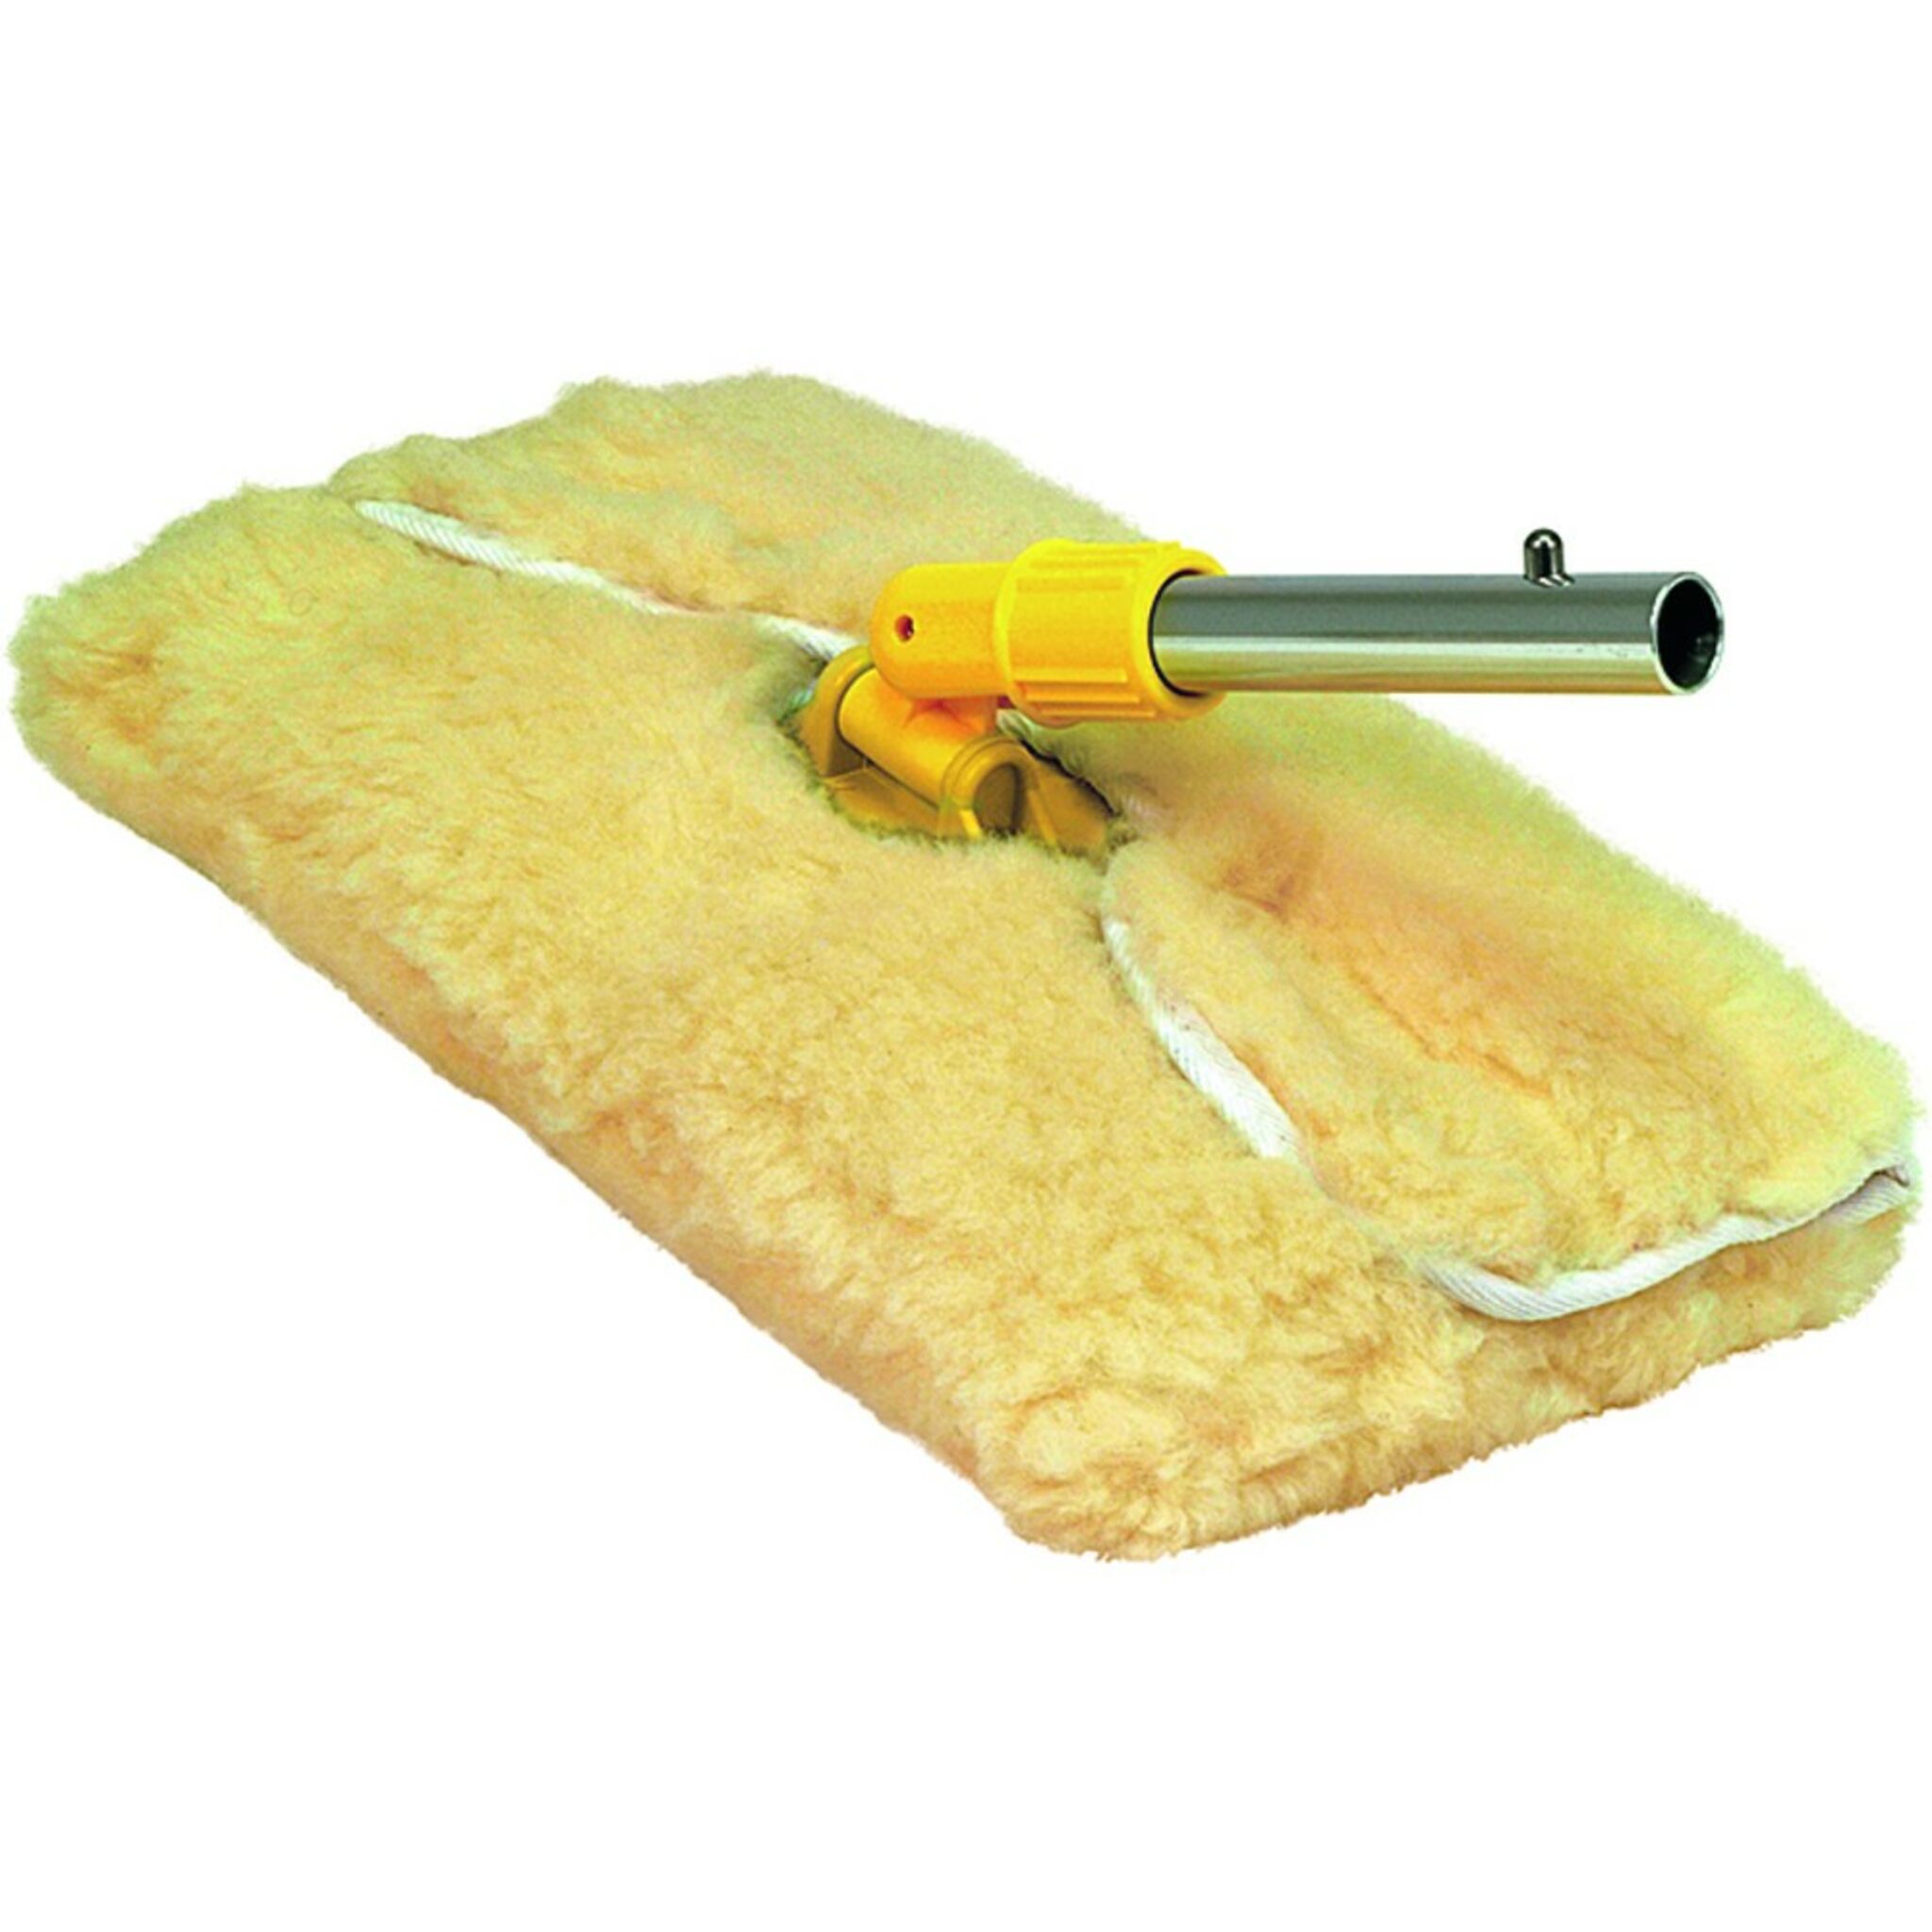 Soft surface cleaner with universal adapter